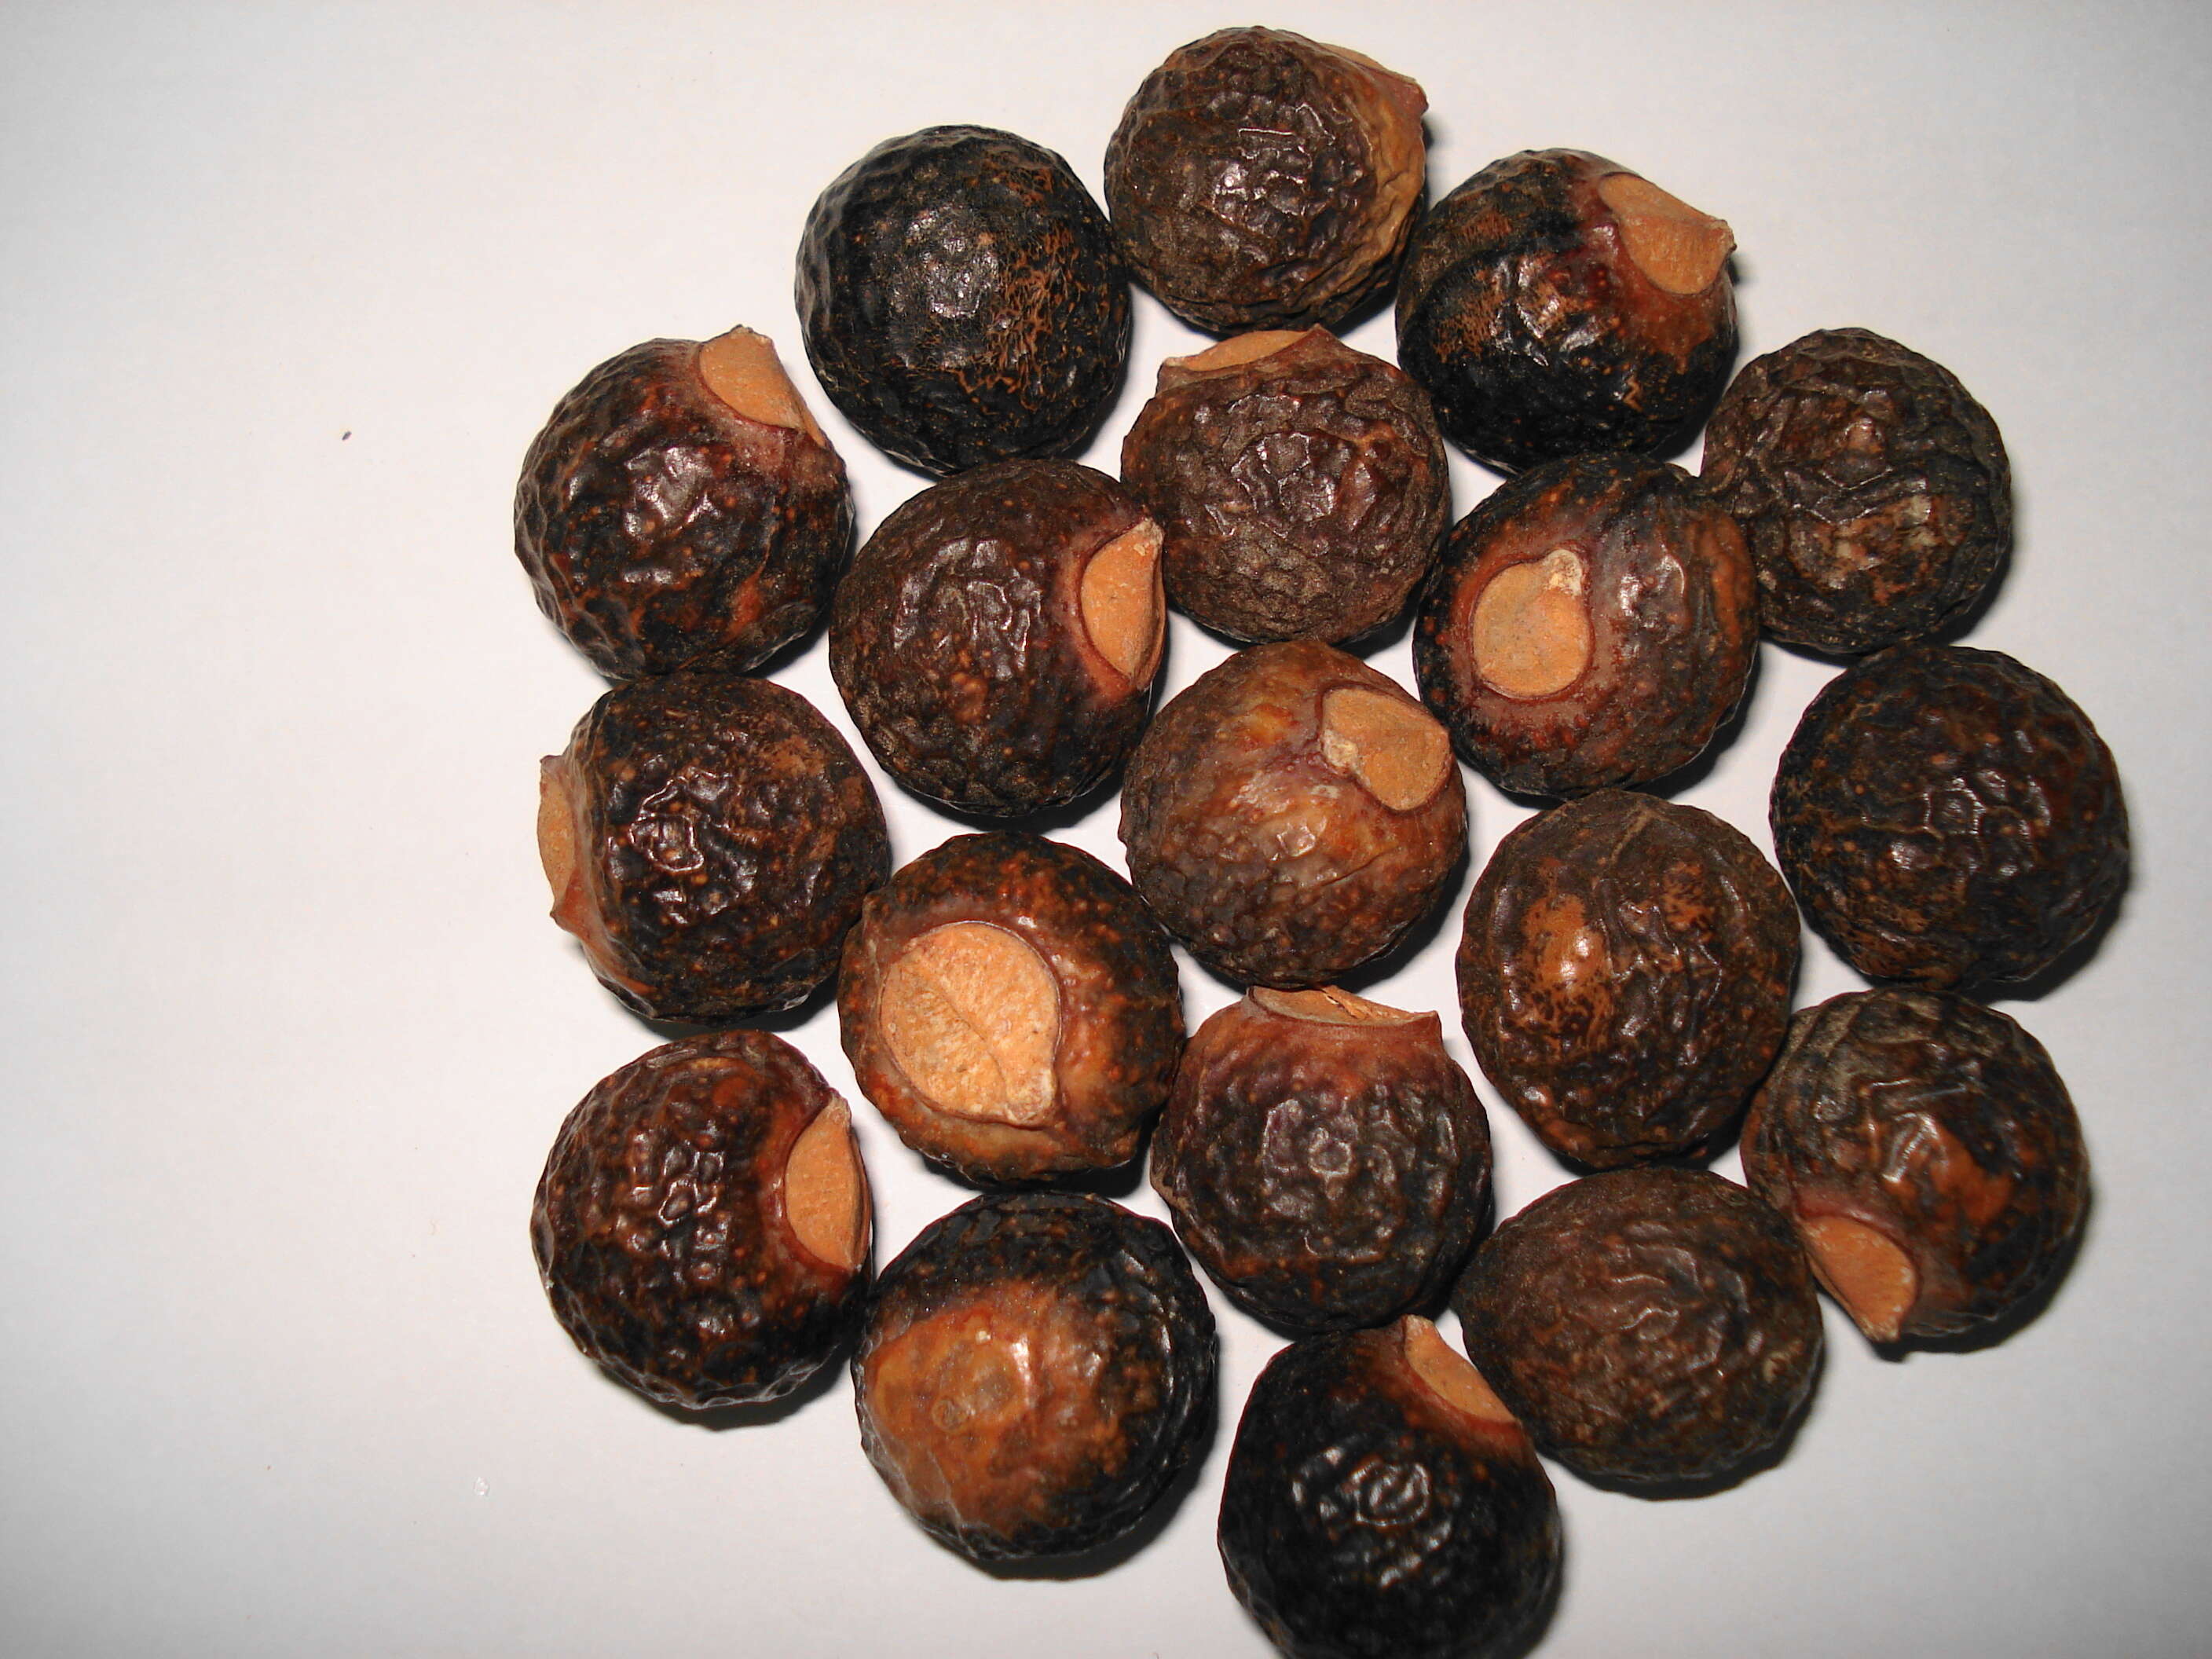 Image of Chinese soapberry